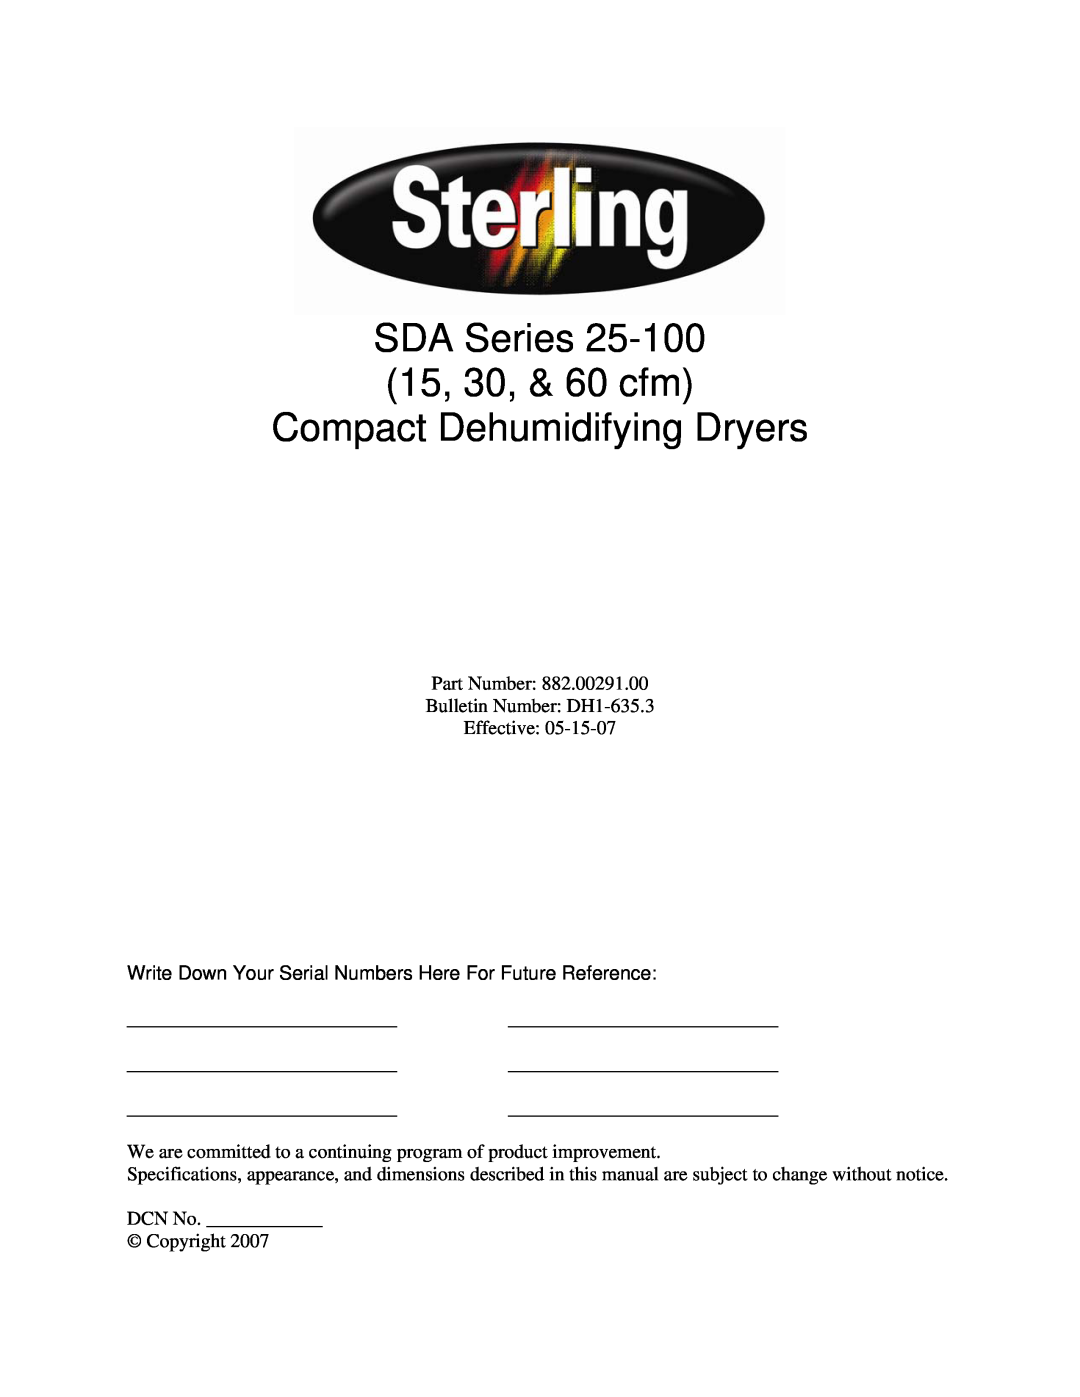 Sterling 882.00291.00 specifications SDA Series 15-60cfm Compact Dehumidifying Dryers 